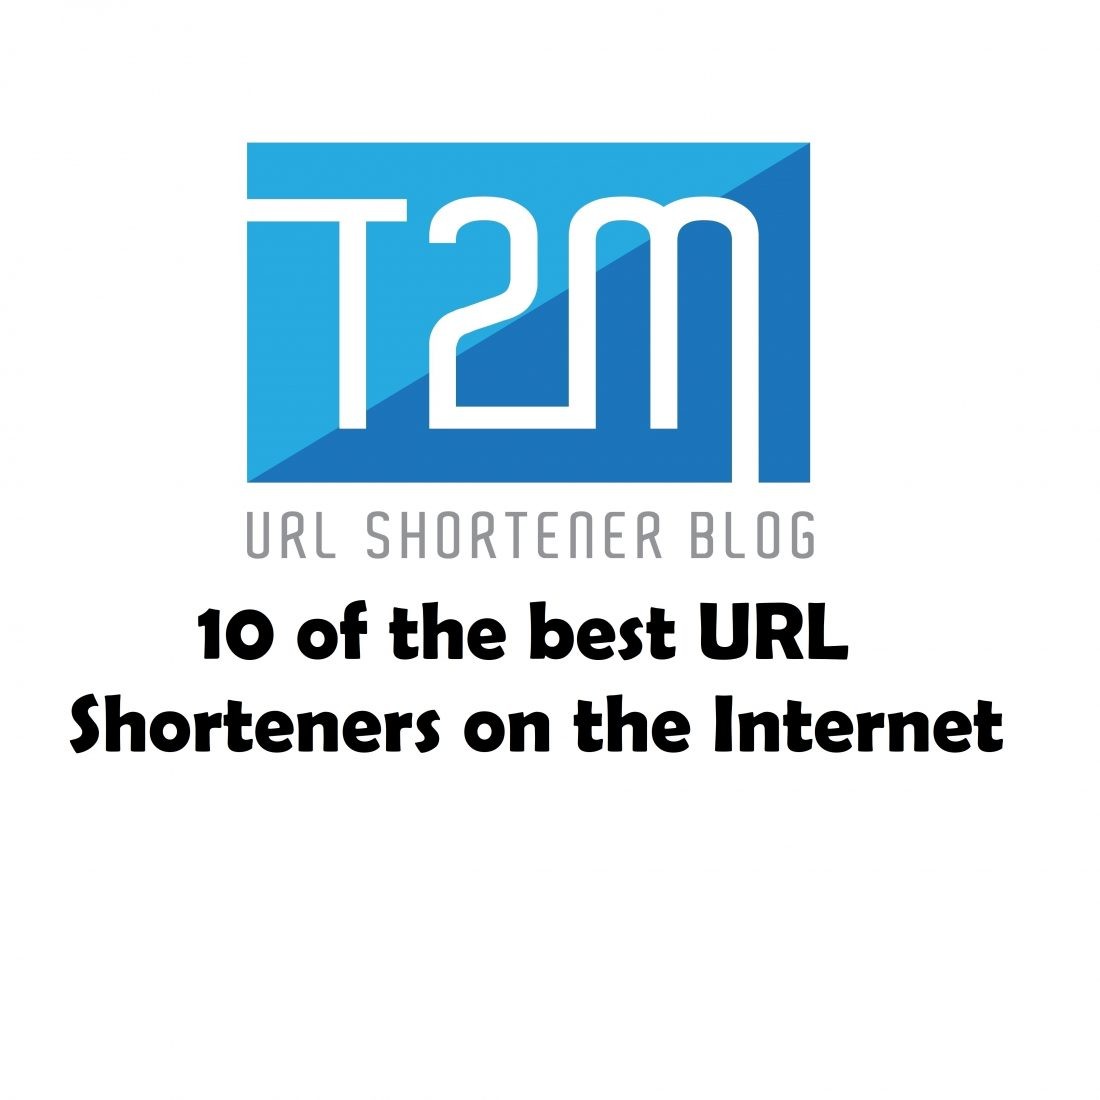 10 of the best URL Shorteners on the Internet